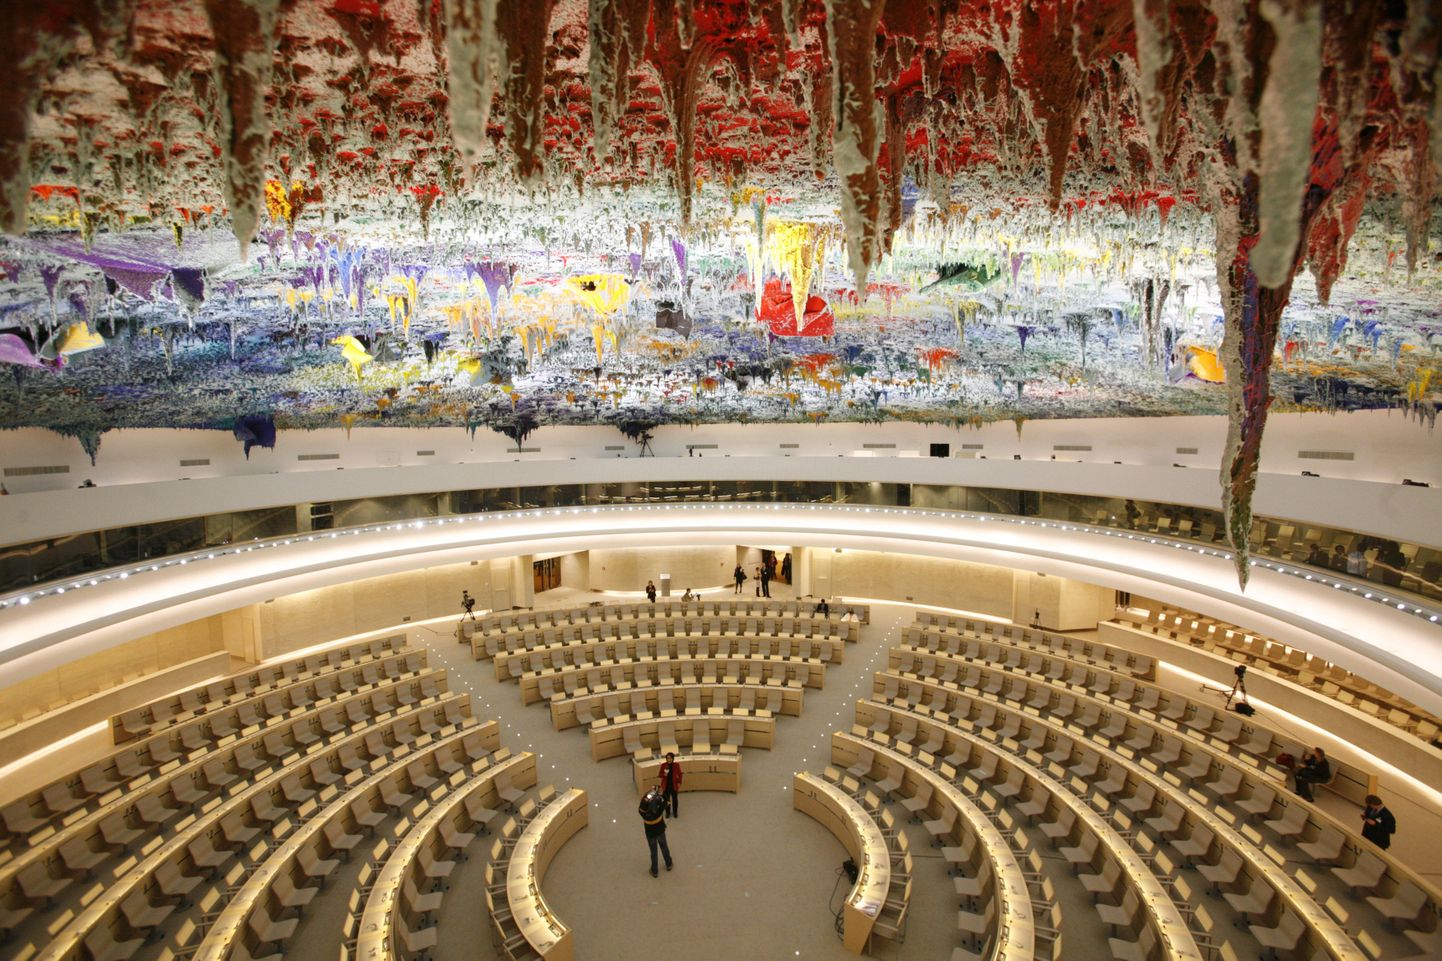 The newly renovated Room XX is pictured after the unveiling ceremony at the European headquarters of the United Nations in Geneva November 18, 2008. Spanish artist Miguel Barcelo was commissioned by the Foundation ONUART on the sixtieth anniversary of the Universal Declaration of Human Rights to undertake the painting of the ceiling, the most extensive work of art in the history of the United Nations at the venue for the Human Rights Council. Barcelo used over one hundred tones of paint with pigments from all corners of the globe on the enormous 1500 metres squared dome. The complete renovations to Room XX cost approximately 20 million Euros ($25 million) REUTERS/Denis Balibouse   (SWITZERLAND)